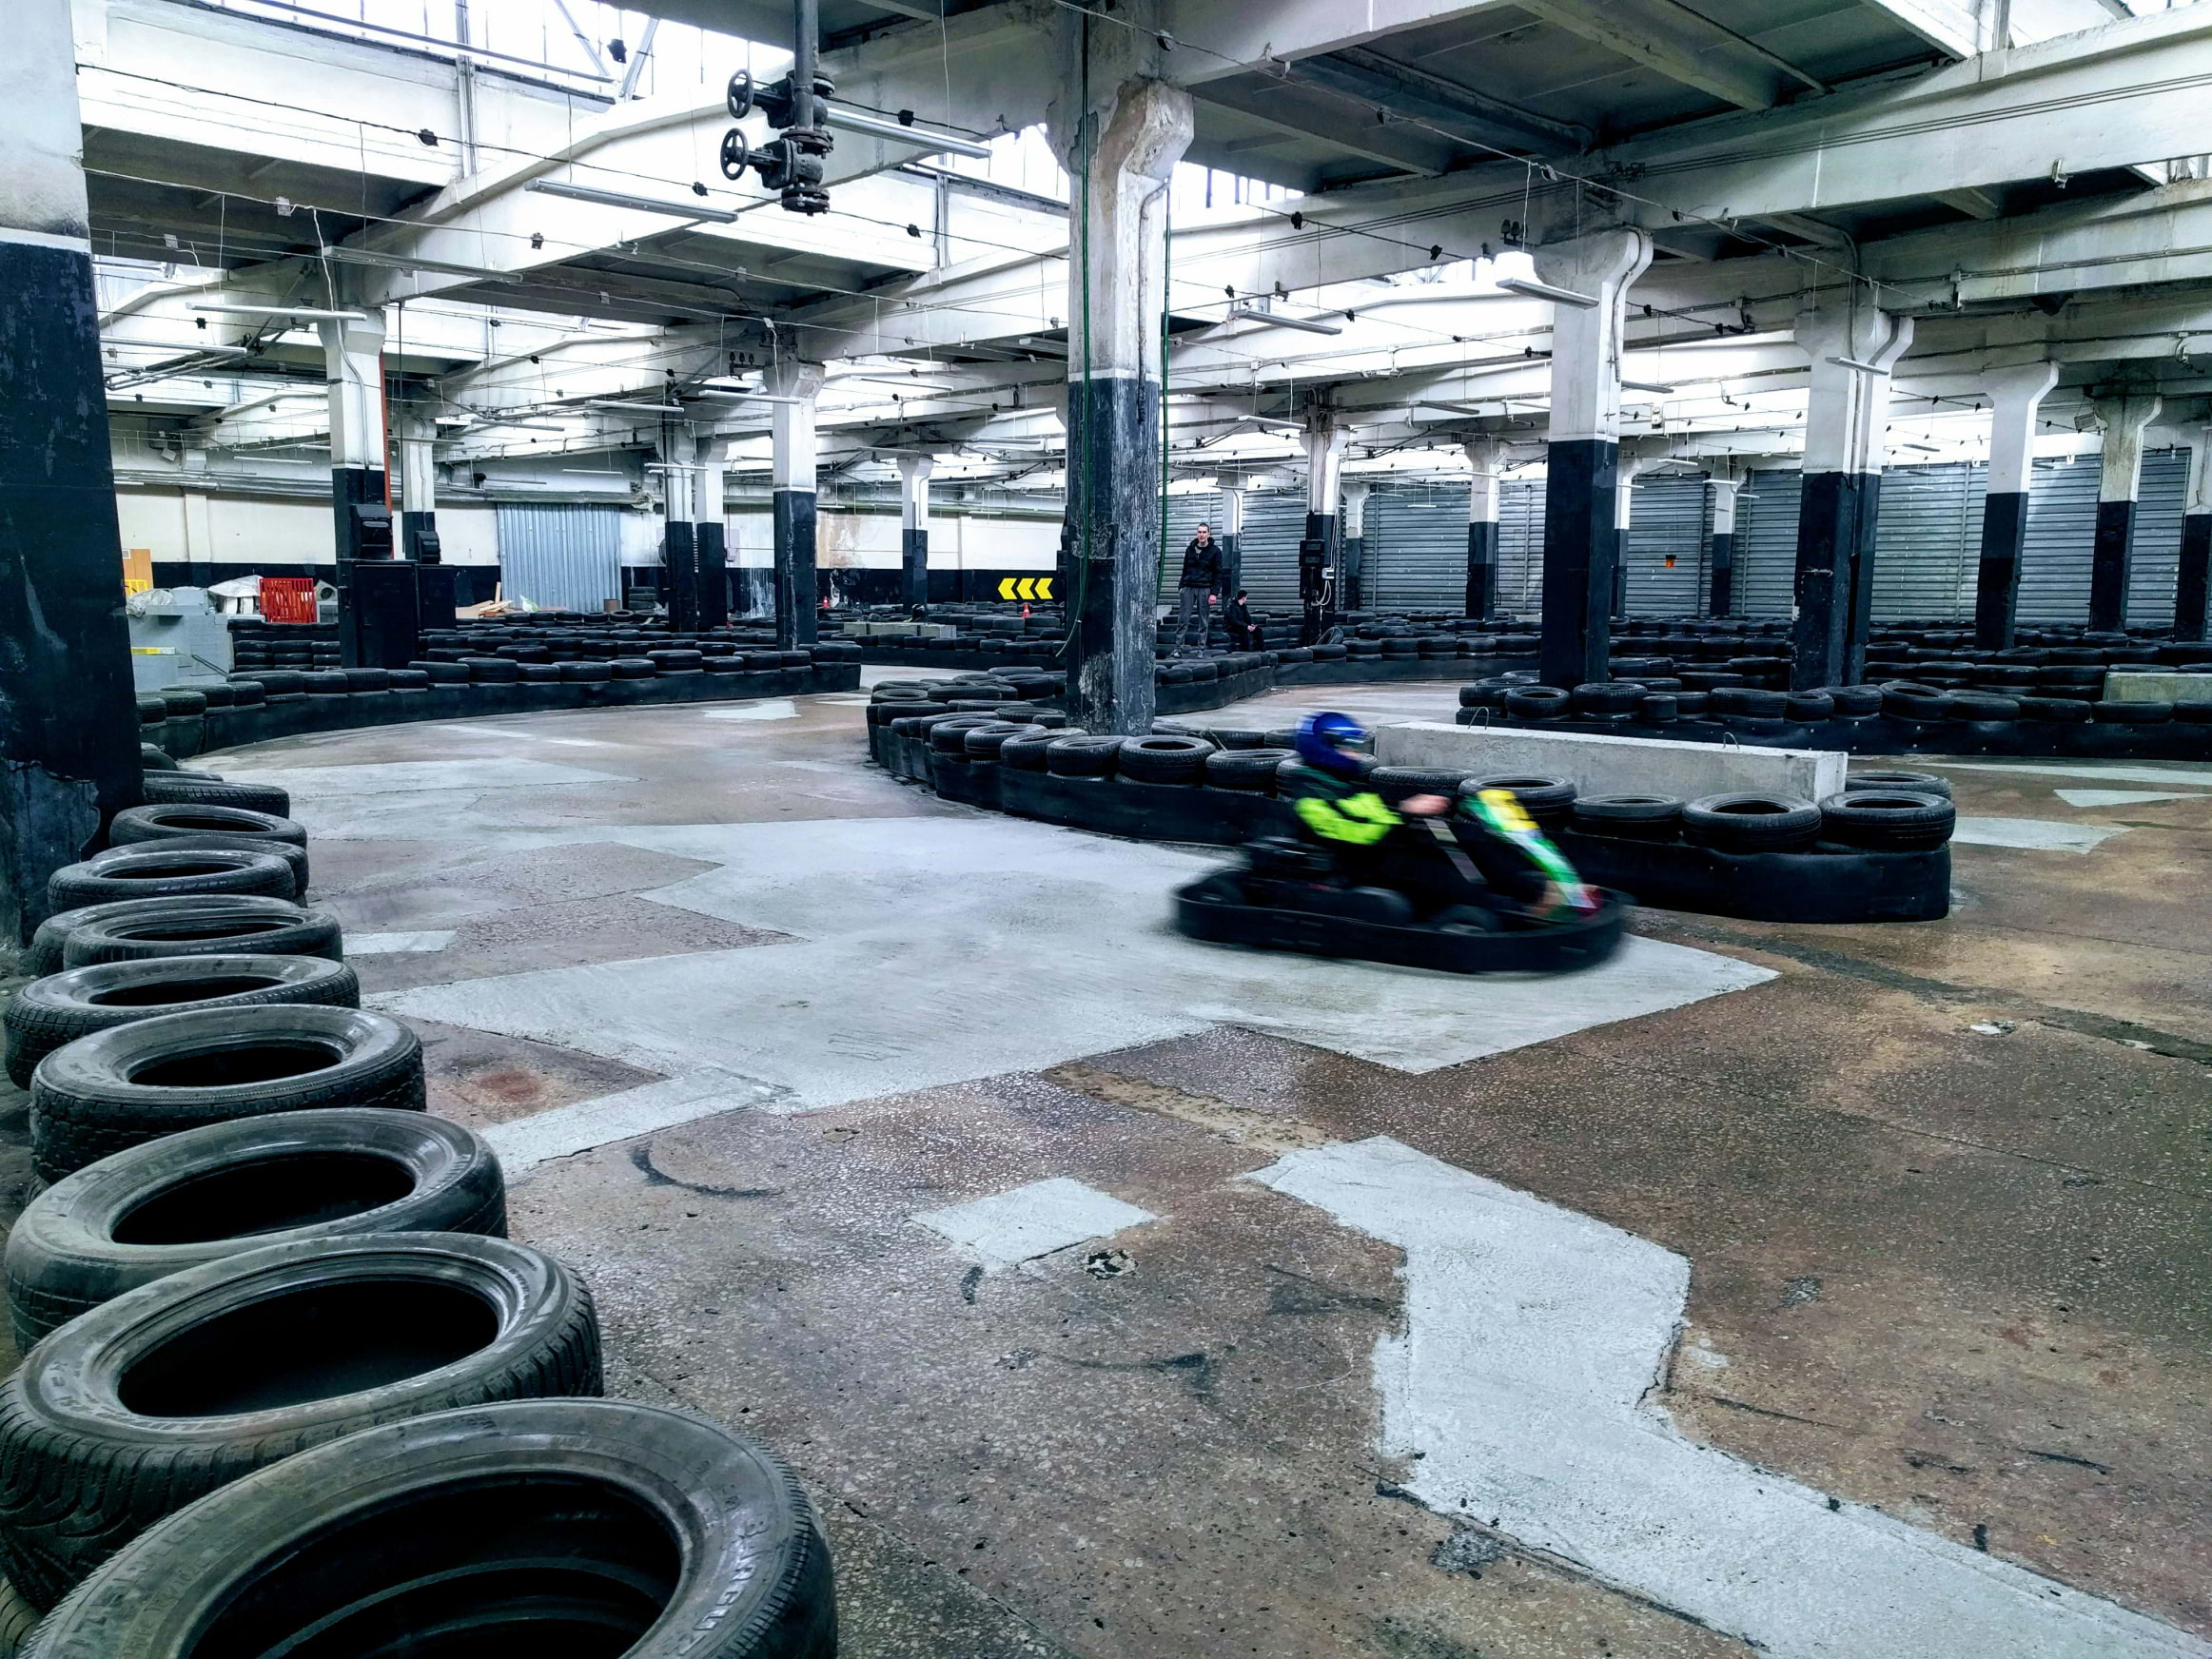 Someone driving around an indoor go-karting track